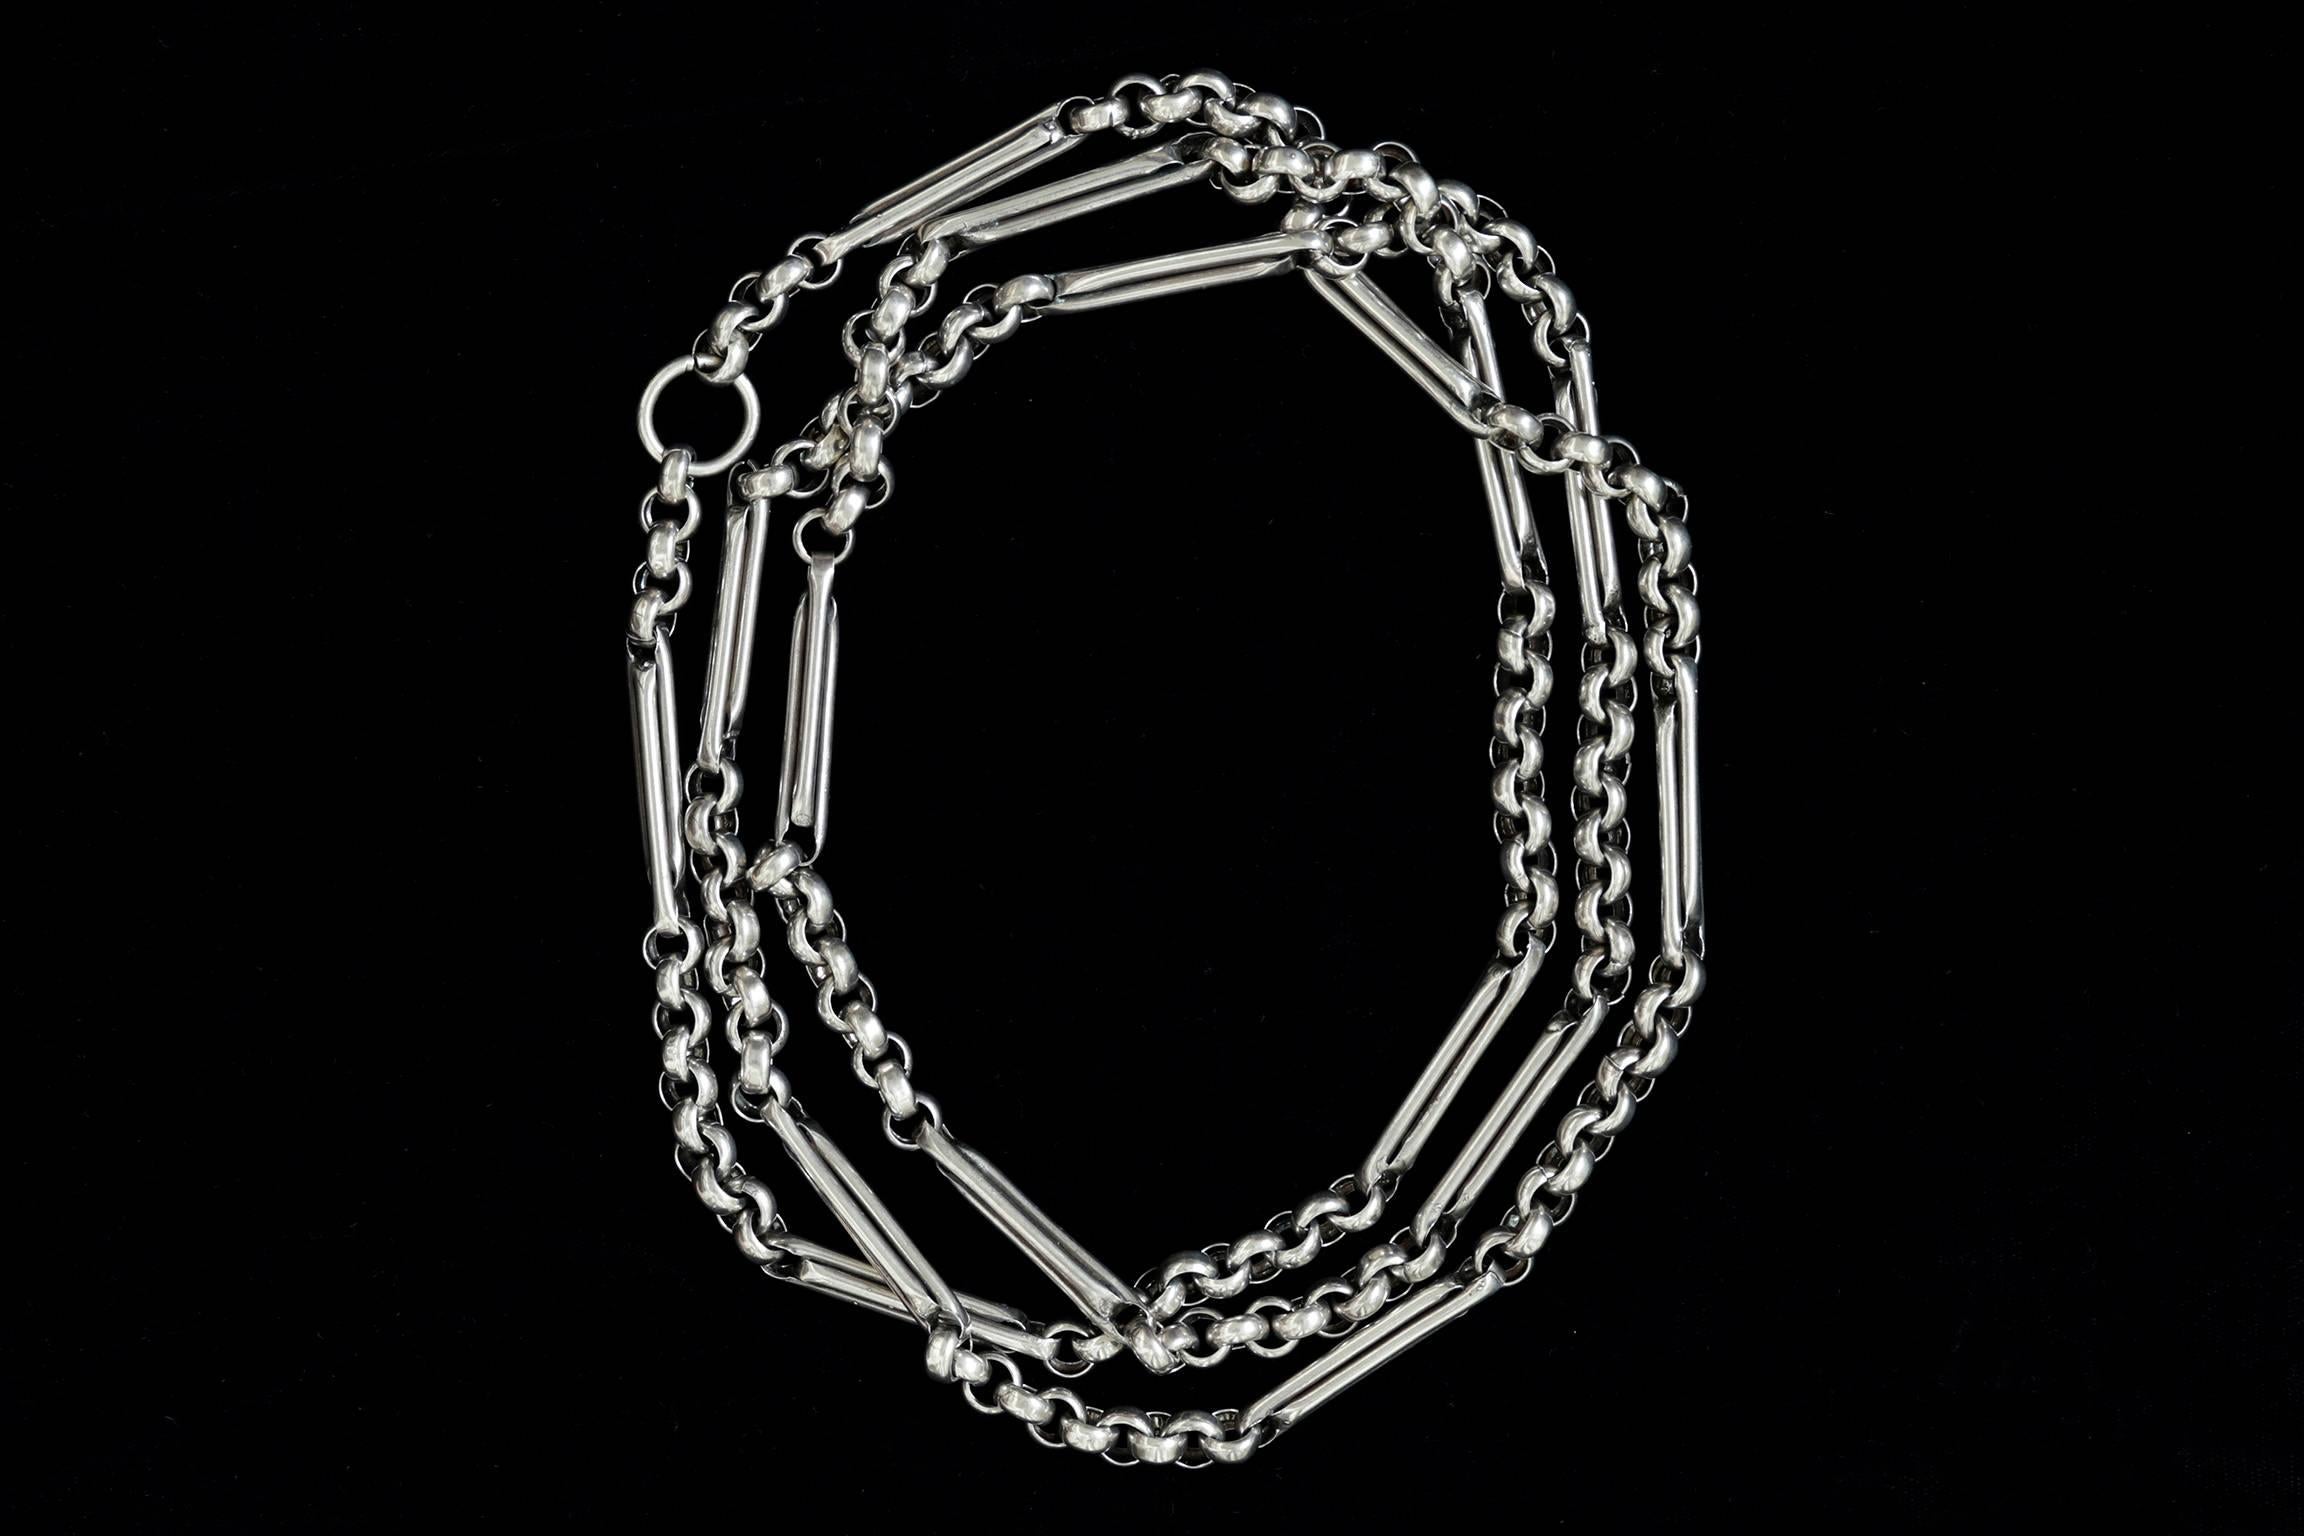 C.1880. A fabulous Victorian sterling silver watch chain. 
A rare piece with its extra length (just under 60 inches) and substantial large bars connected with chunky links. It has English standard silver hallmark on the large ring. Each bar link